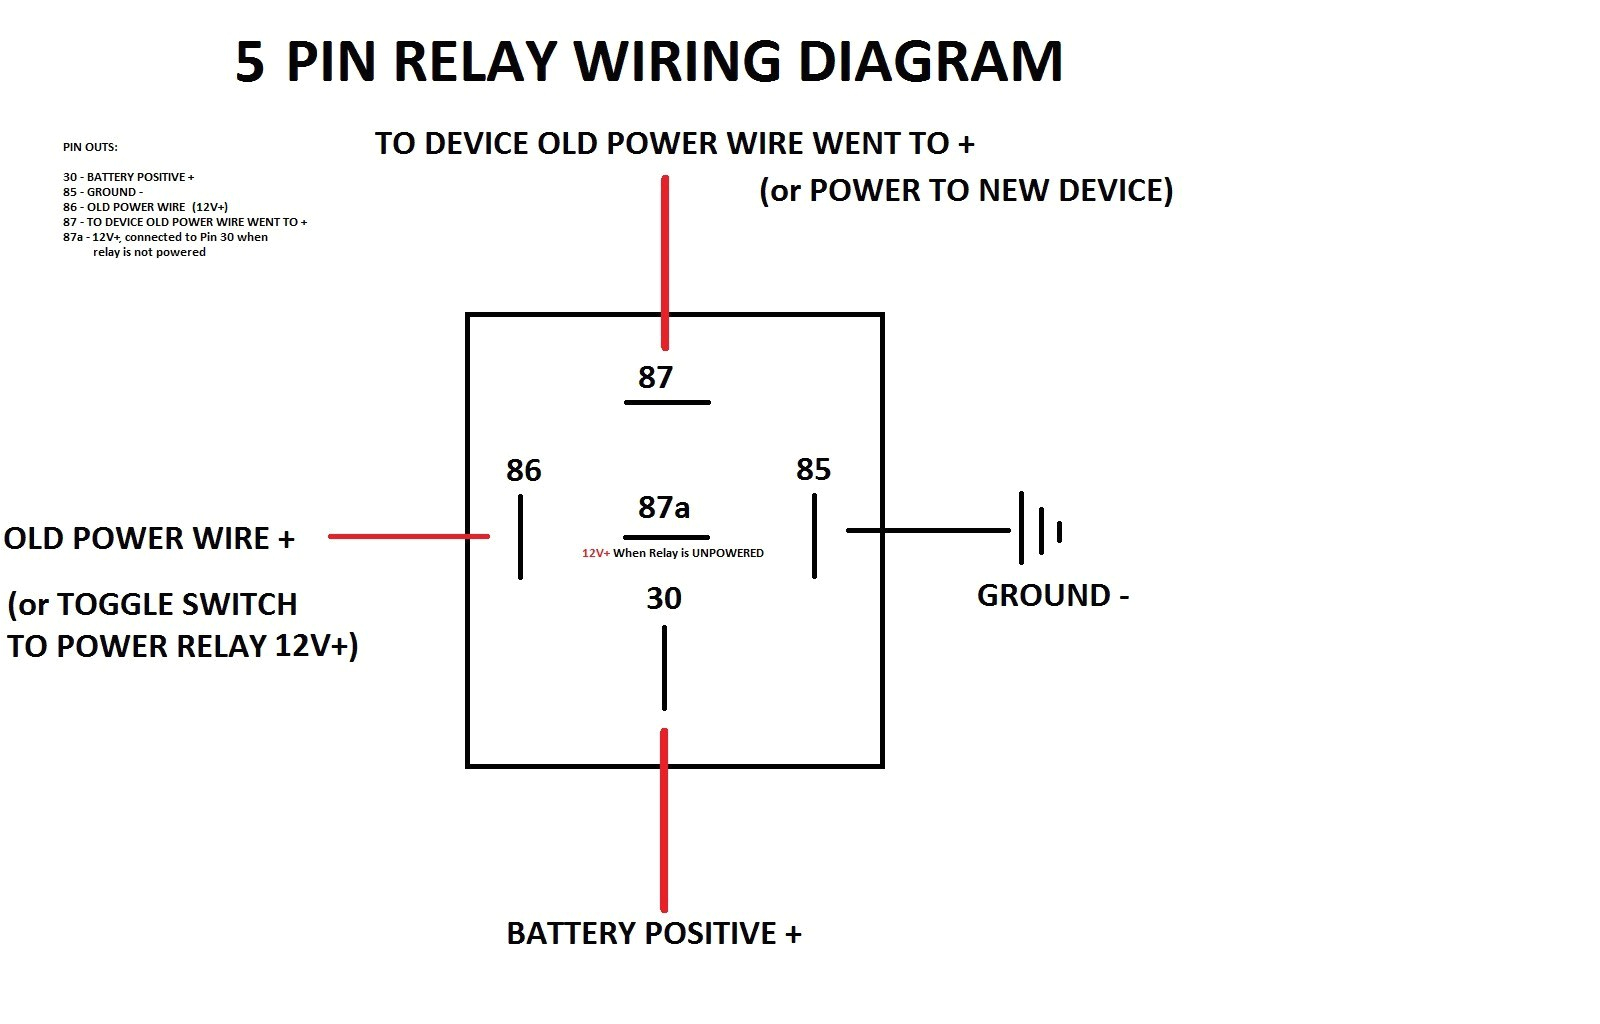 4 wire relay schematic another blog about wiring diagram 4 pin relay wiring lights 4 wire relay schematic